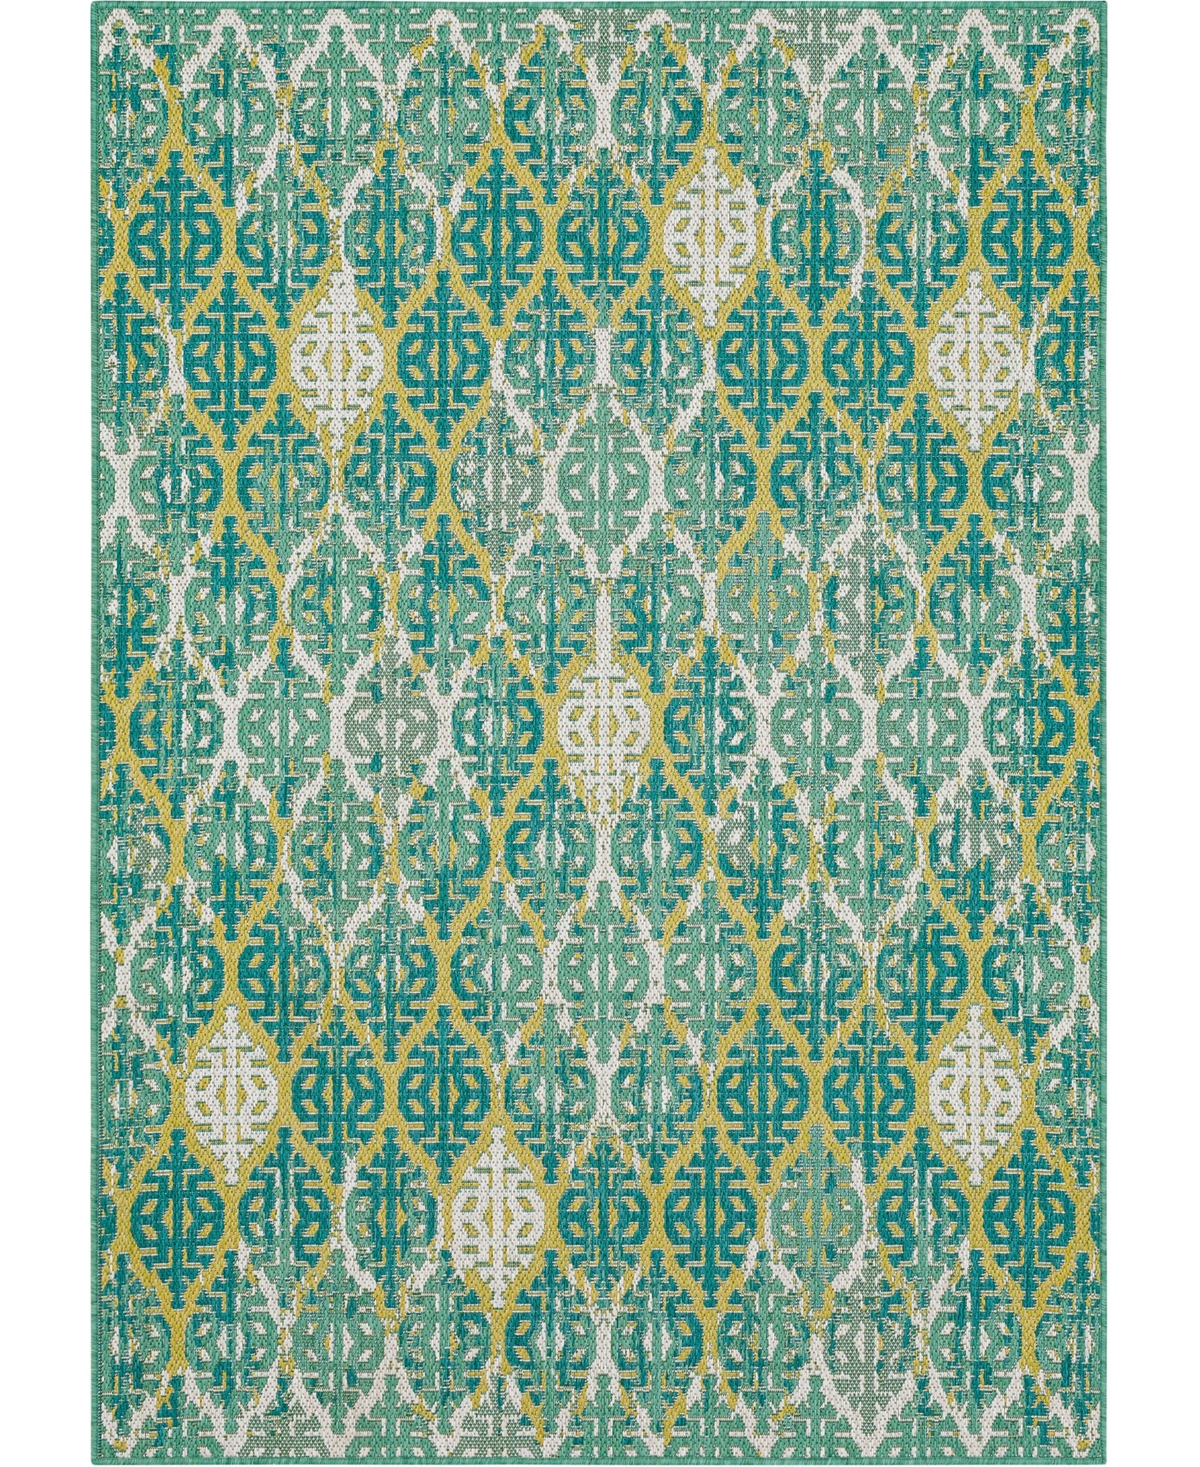 Mohawk Malibu Outdoor Stamped Ikat 8' X 10' Area Rug In Teal